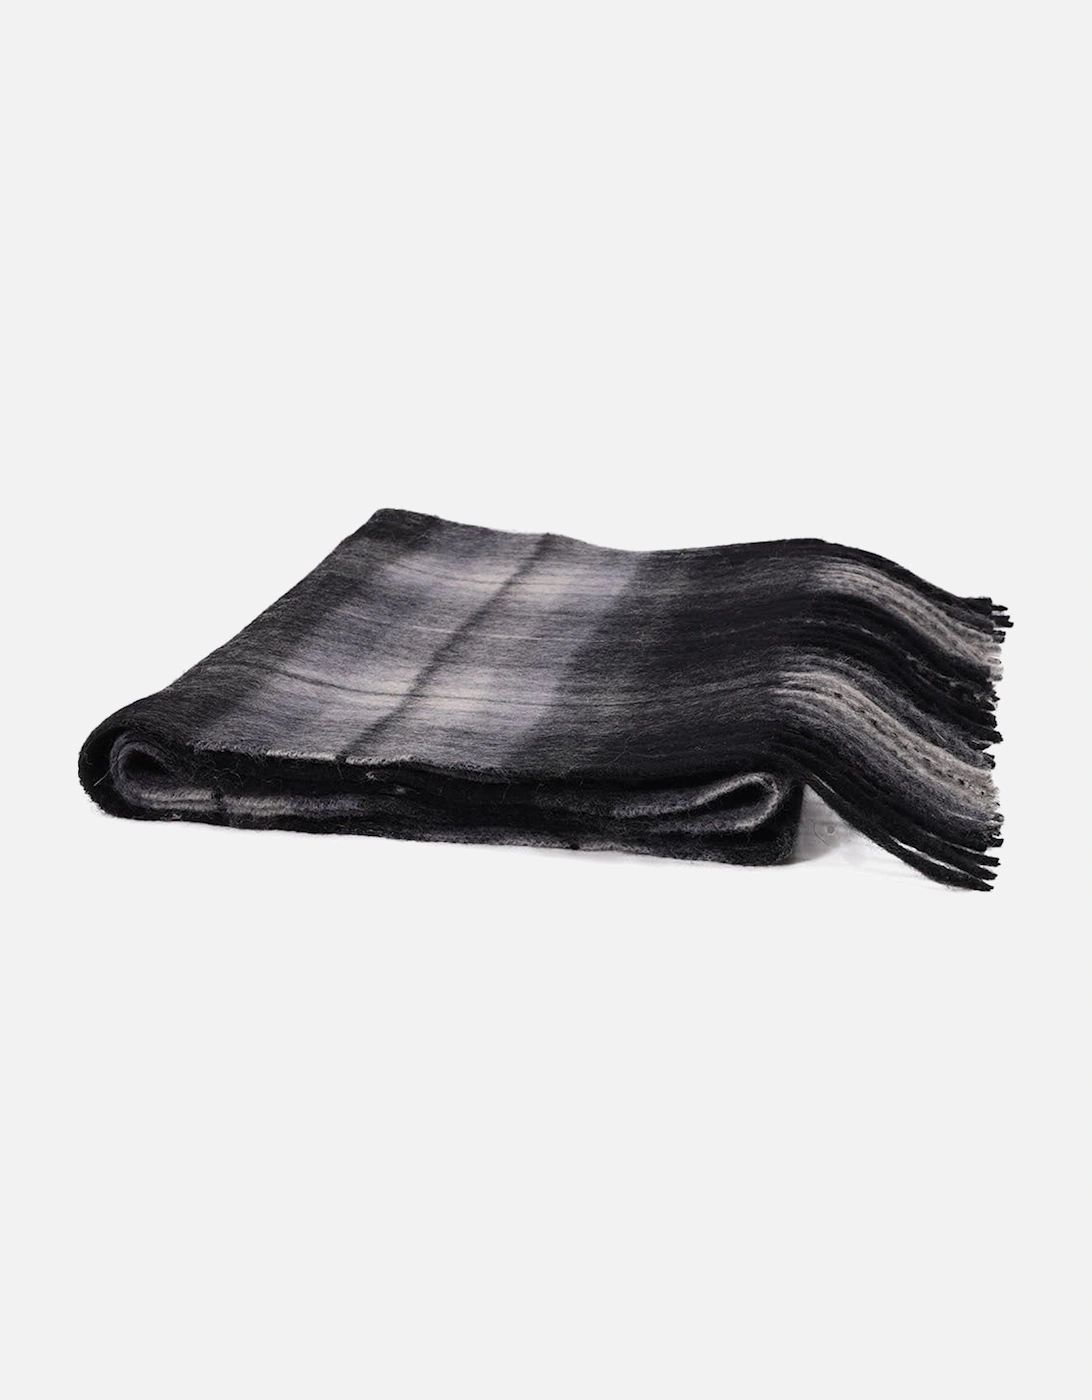 Pure Lambswool Checked Scarf